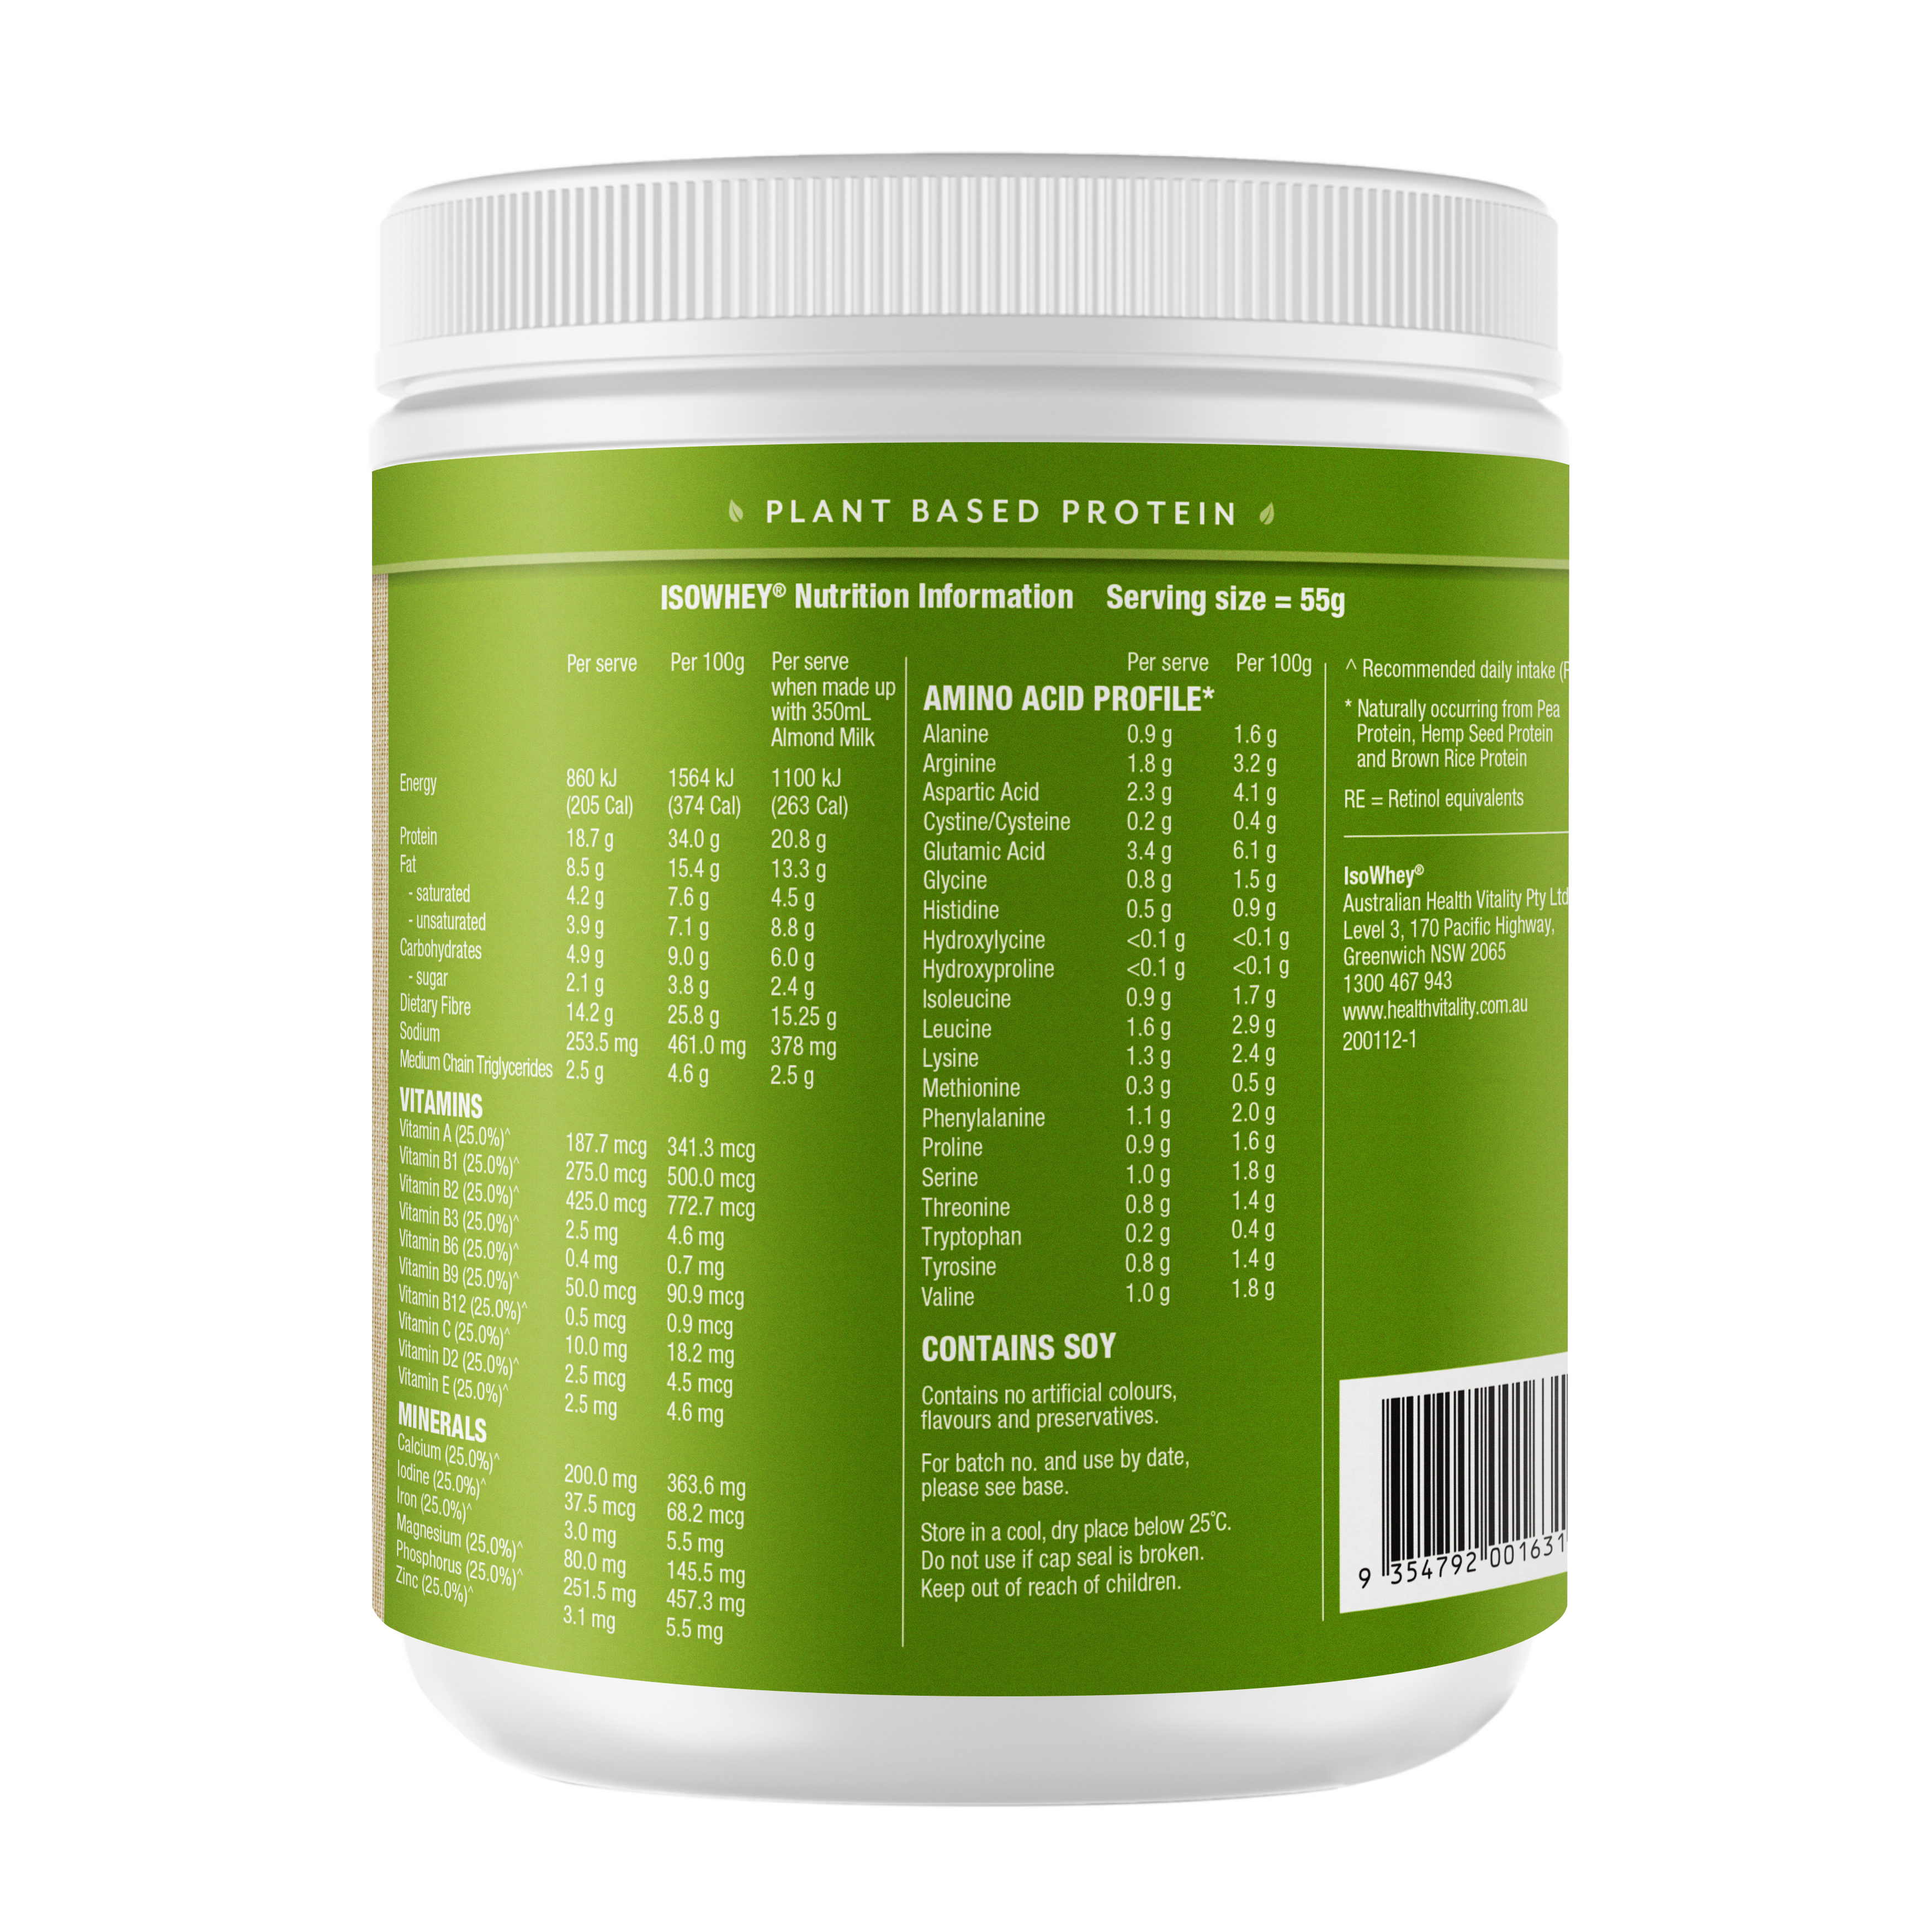 IsoWhey Plant-Based Meal Replacement Chocolate Shake 550g backshot, showing its nutritional information